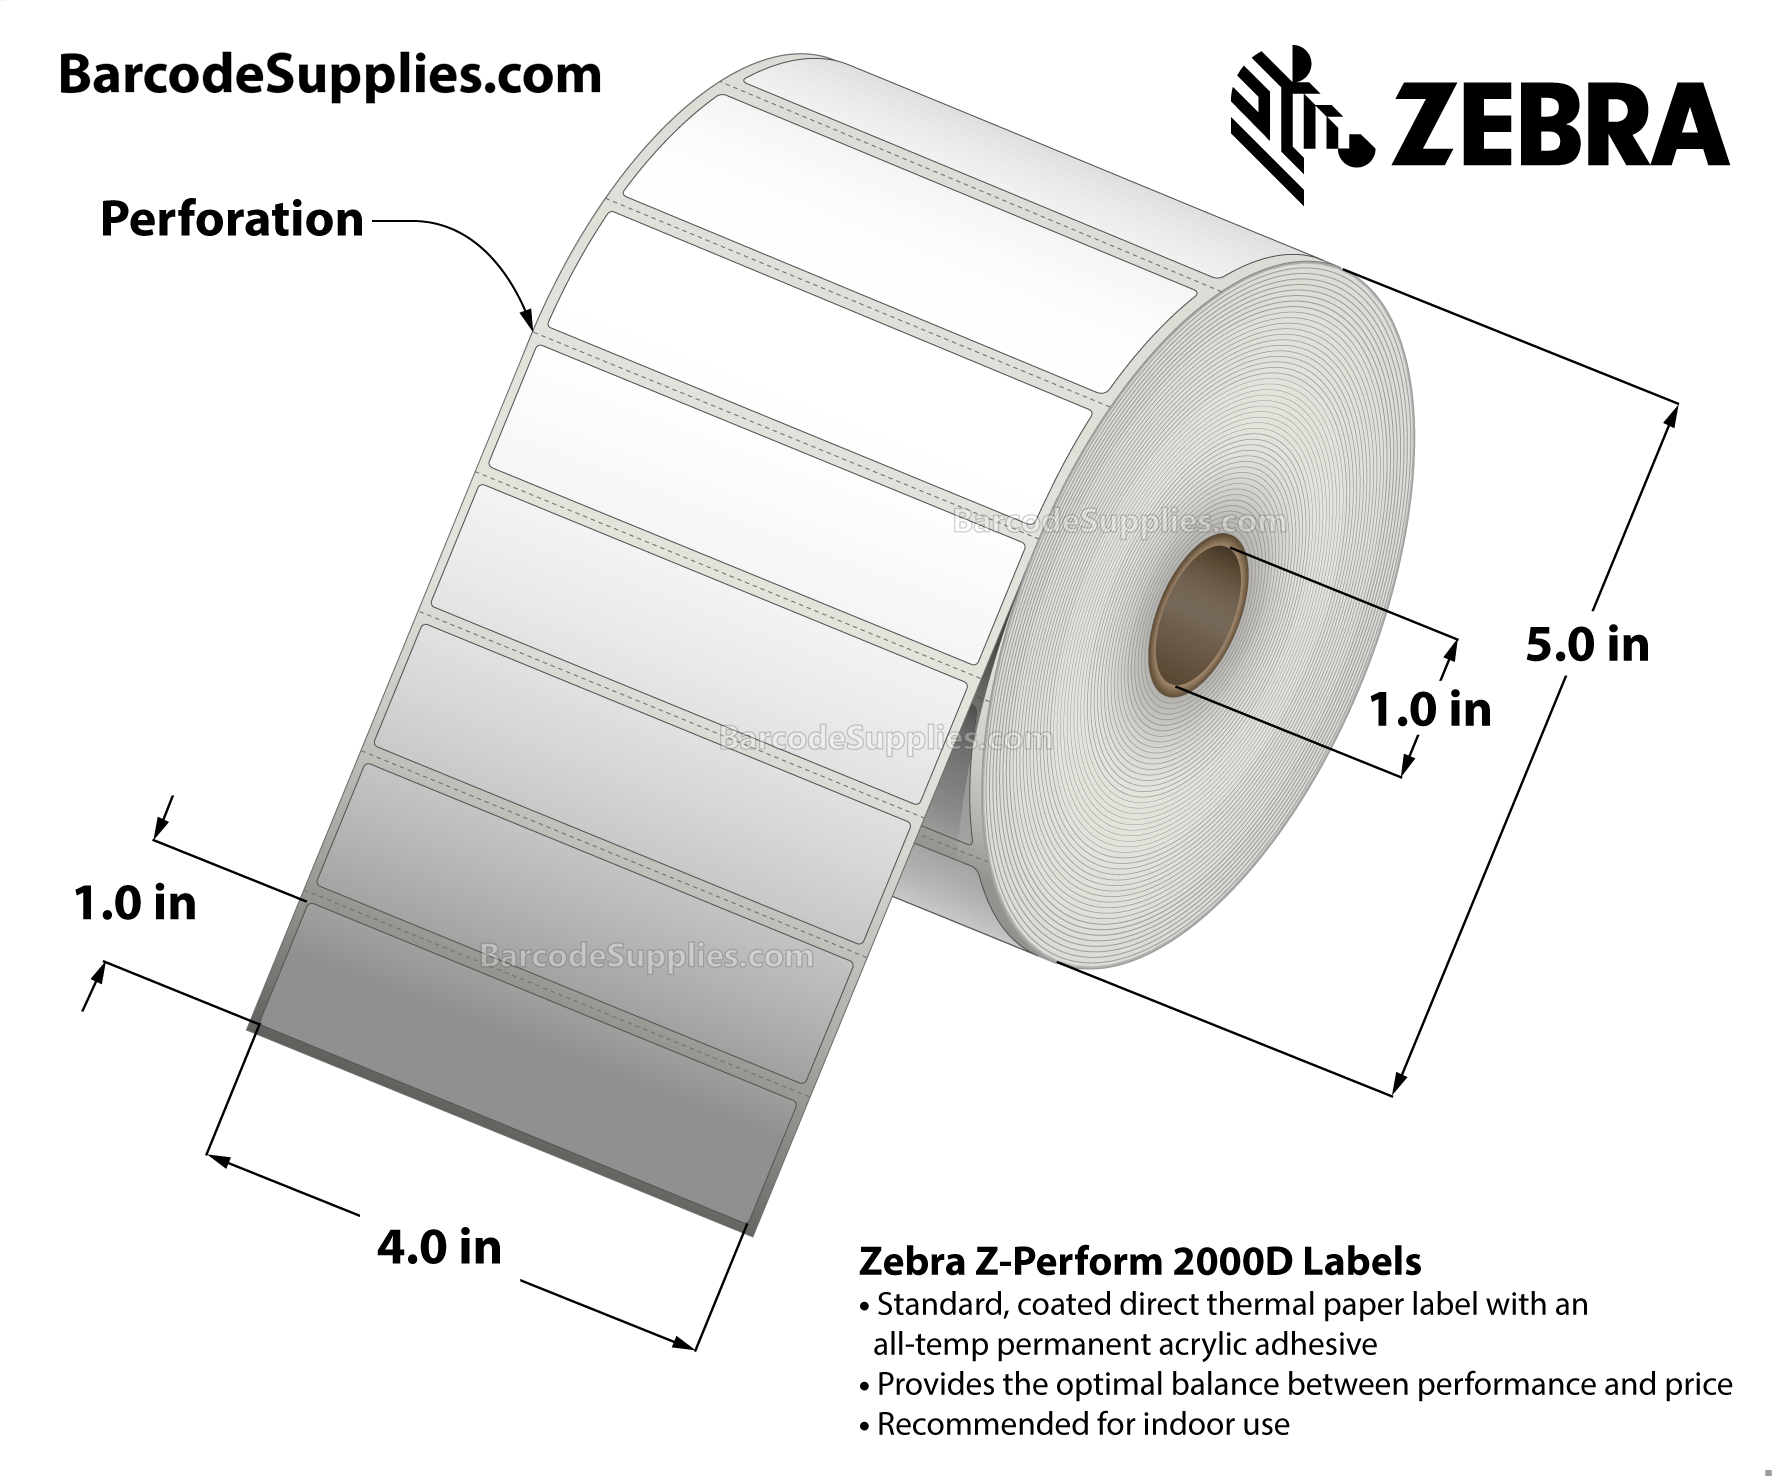 4 x 1 Direct Thermal White Z-Perform 2000D Labels With All-Temp Adhesive - Perforated - 2340 Labels Per Roll - Carton Of 6 Rolls - 14040 Labels Total - MPN: 10015783